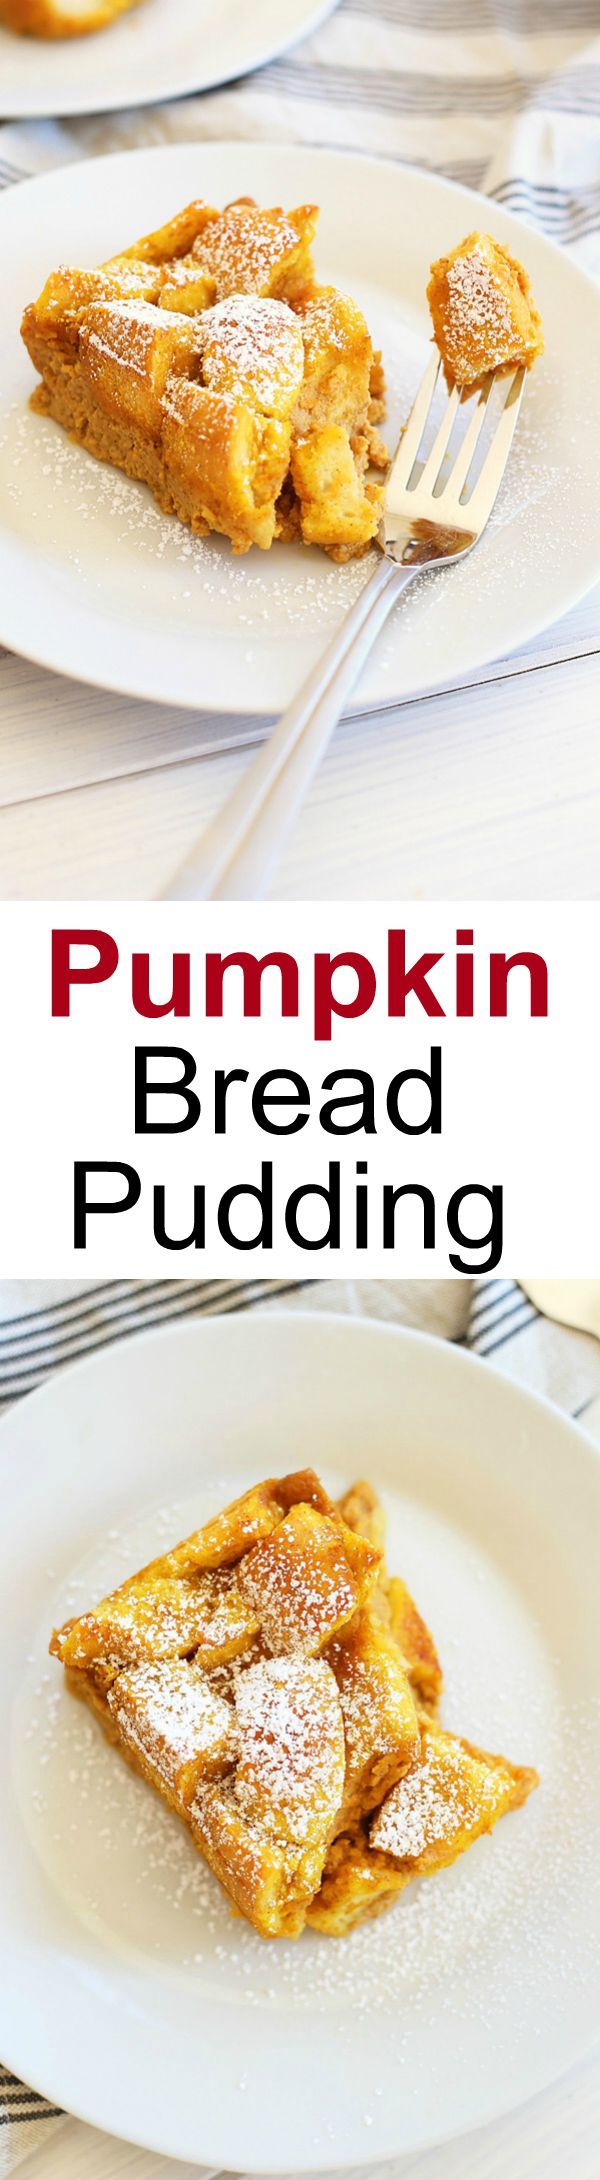 Pumpkin Bread Pudding – turn leftover bread into this amazing and seasonal dessert loaded with pumpkin spice and egg custard, so good! | rasamalaysia.com